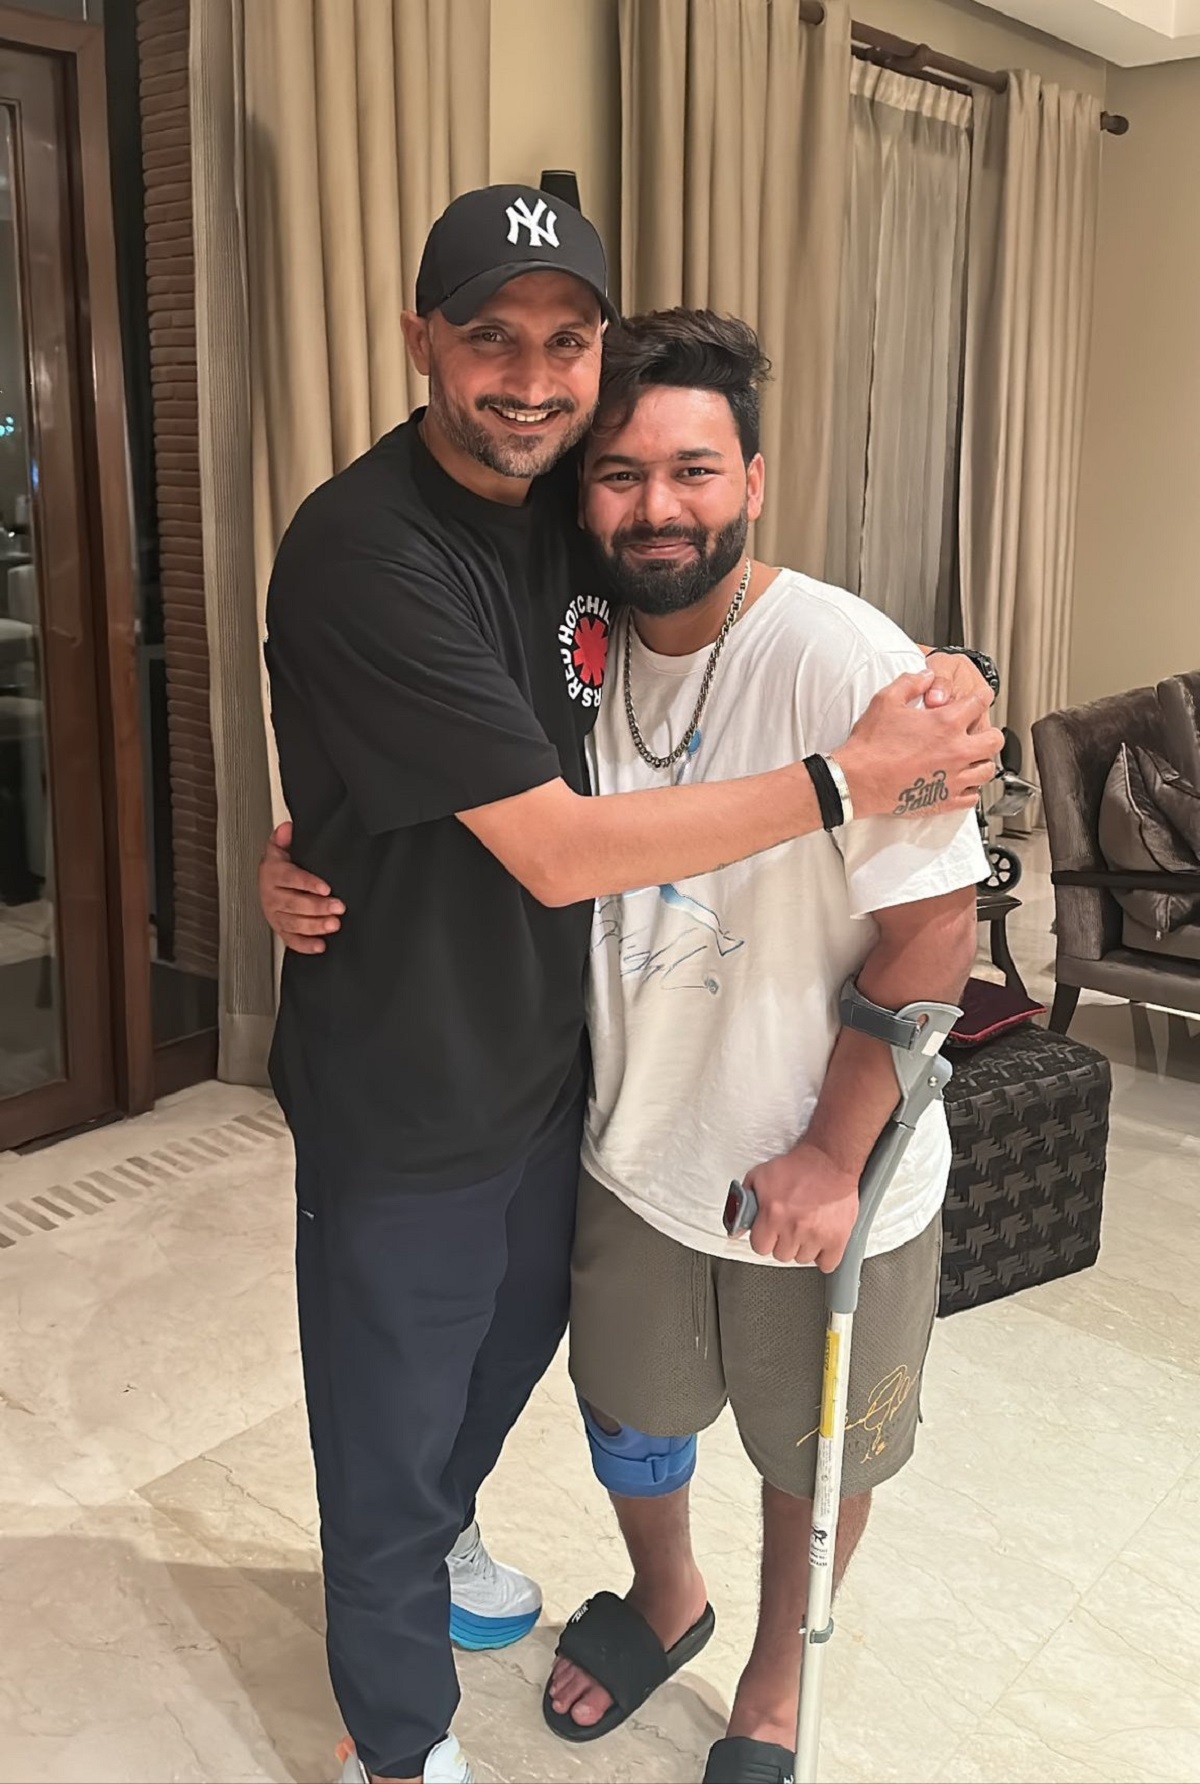 Rishabh Pant Health Update: Sourav Ganguly warns BCCI, Rishabh Pant after Jasprit Bumrah are set to miss IPL 2023, says Pant should take time to heal properly